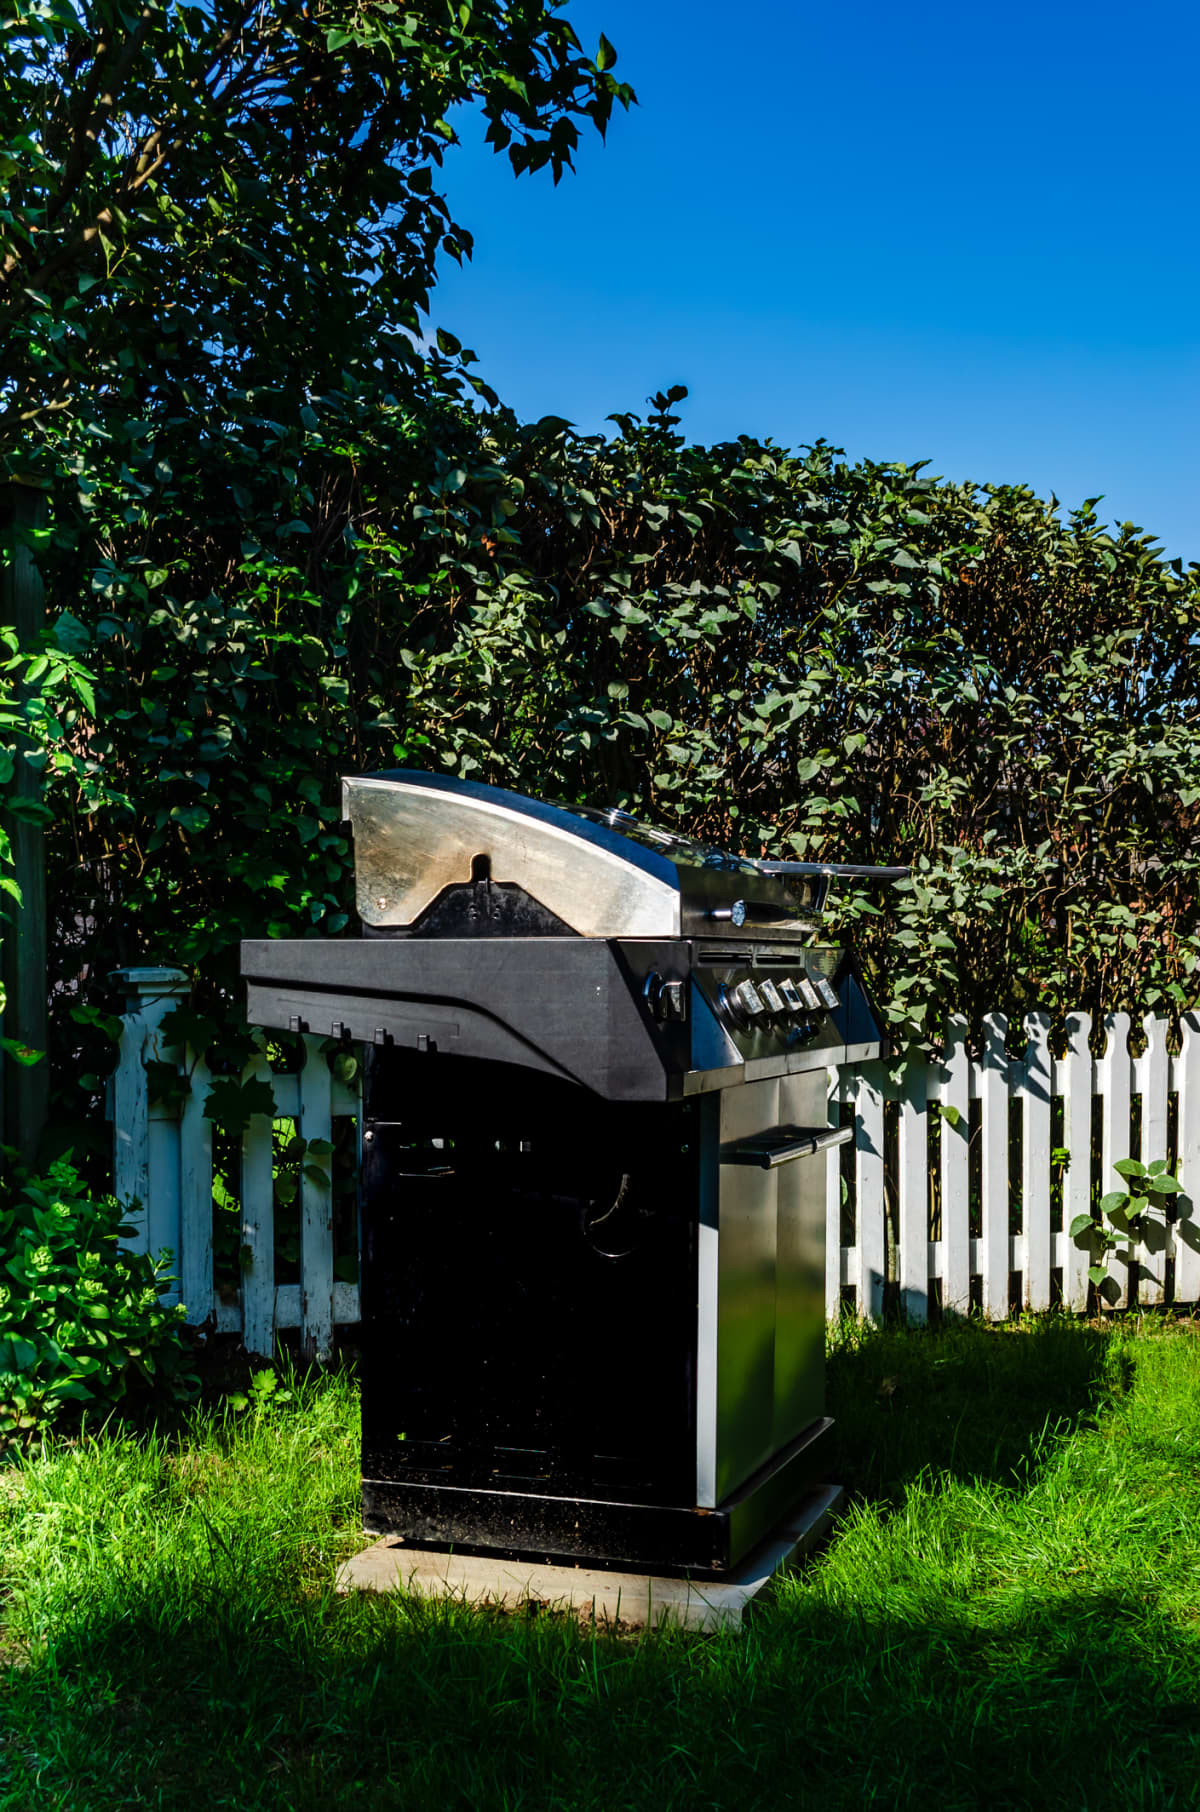 Stainless steel barbecue in a backyard next to bushes and a white picket fence